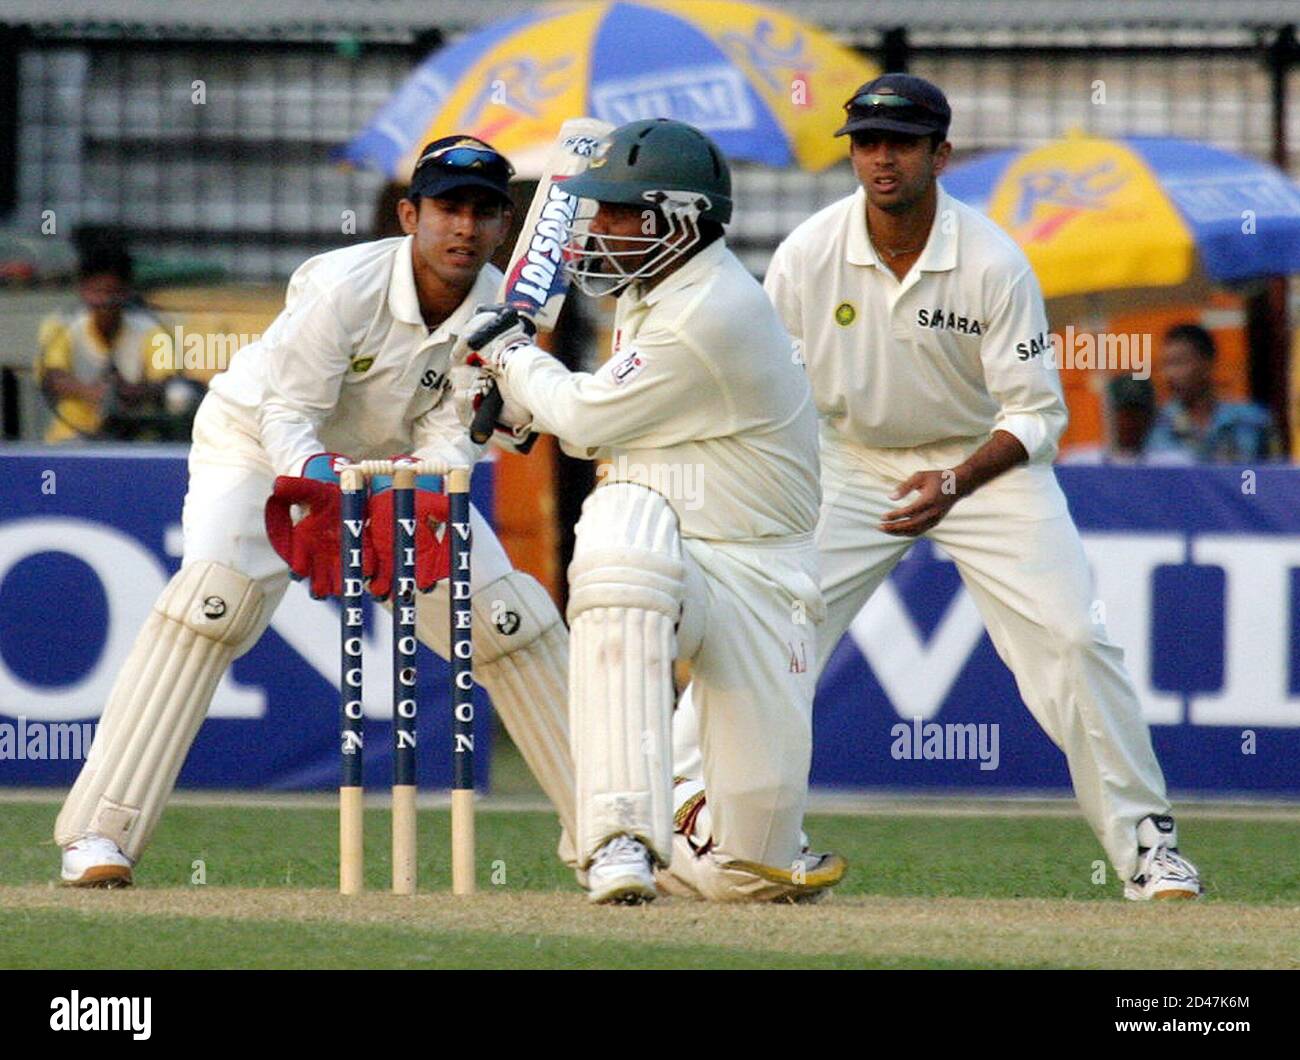 Bangladesh batsman Mohammad Rafiq plays a ball as wicket keeper Dineh Mongia (L) and Rahul Dravid (R) watch during the first day of the first test against India in Dhaka.  Bangladesh batsman Mohammad Rafiq plays a ball as wicket keeper Dineh Mongia (L) and Rahul Dravid (R) watch during the first day of the first test against India in Dhaka stadium on December 10,2004. Bangladesh were all out for 184 runs. REUTERS/Rafiqur Rahman Stock Photo